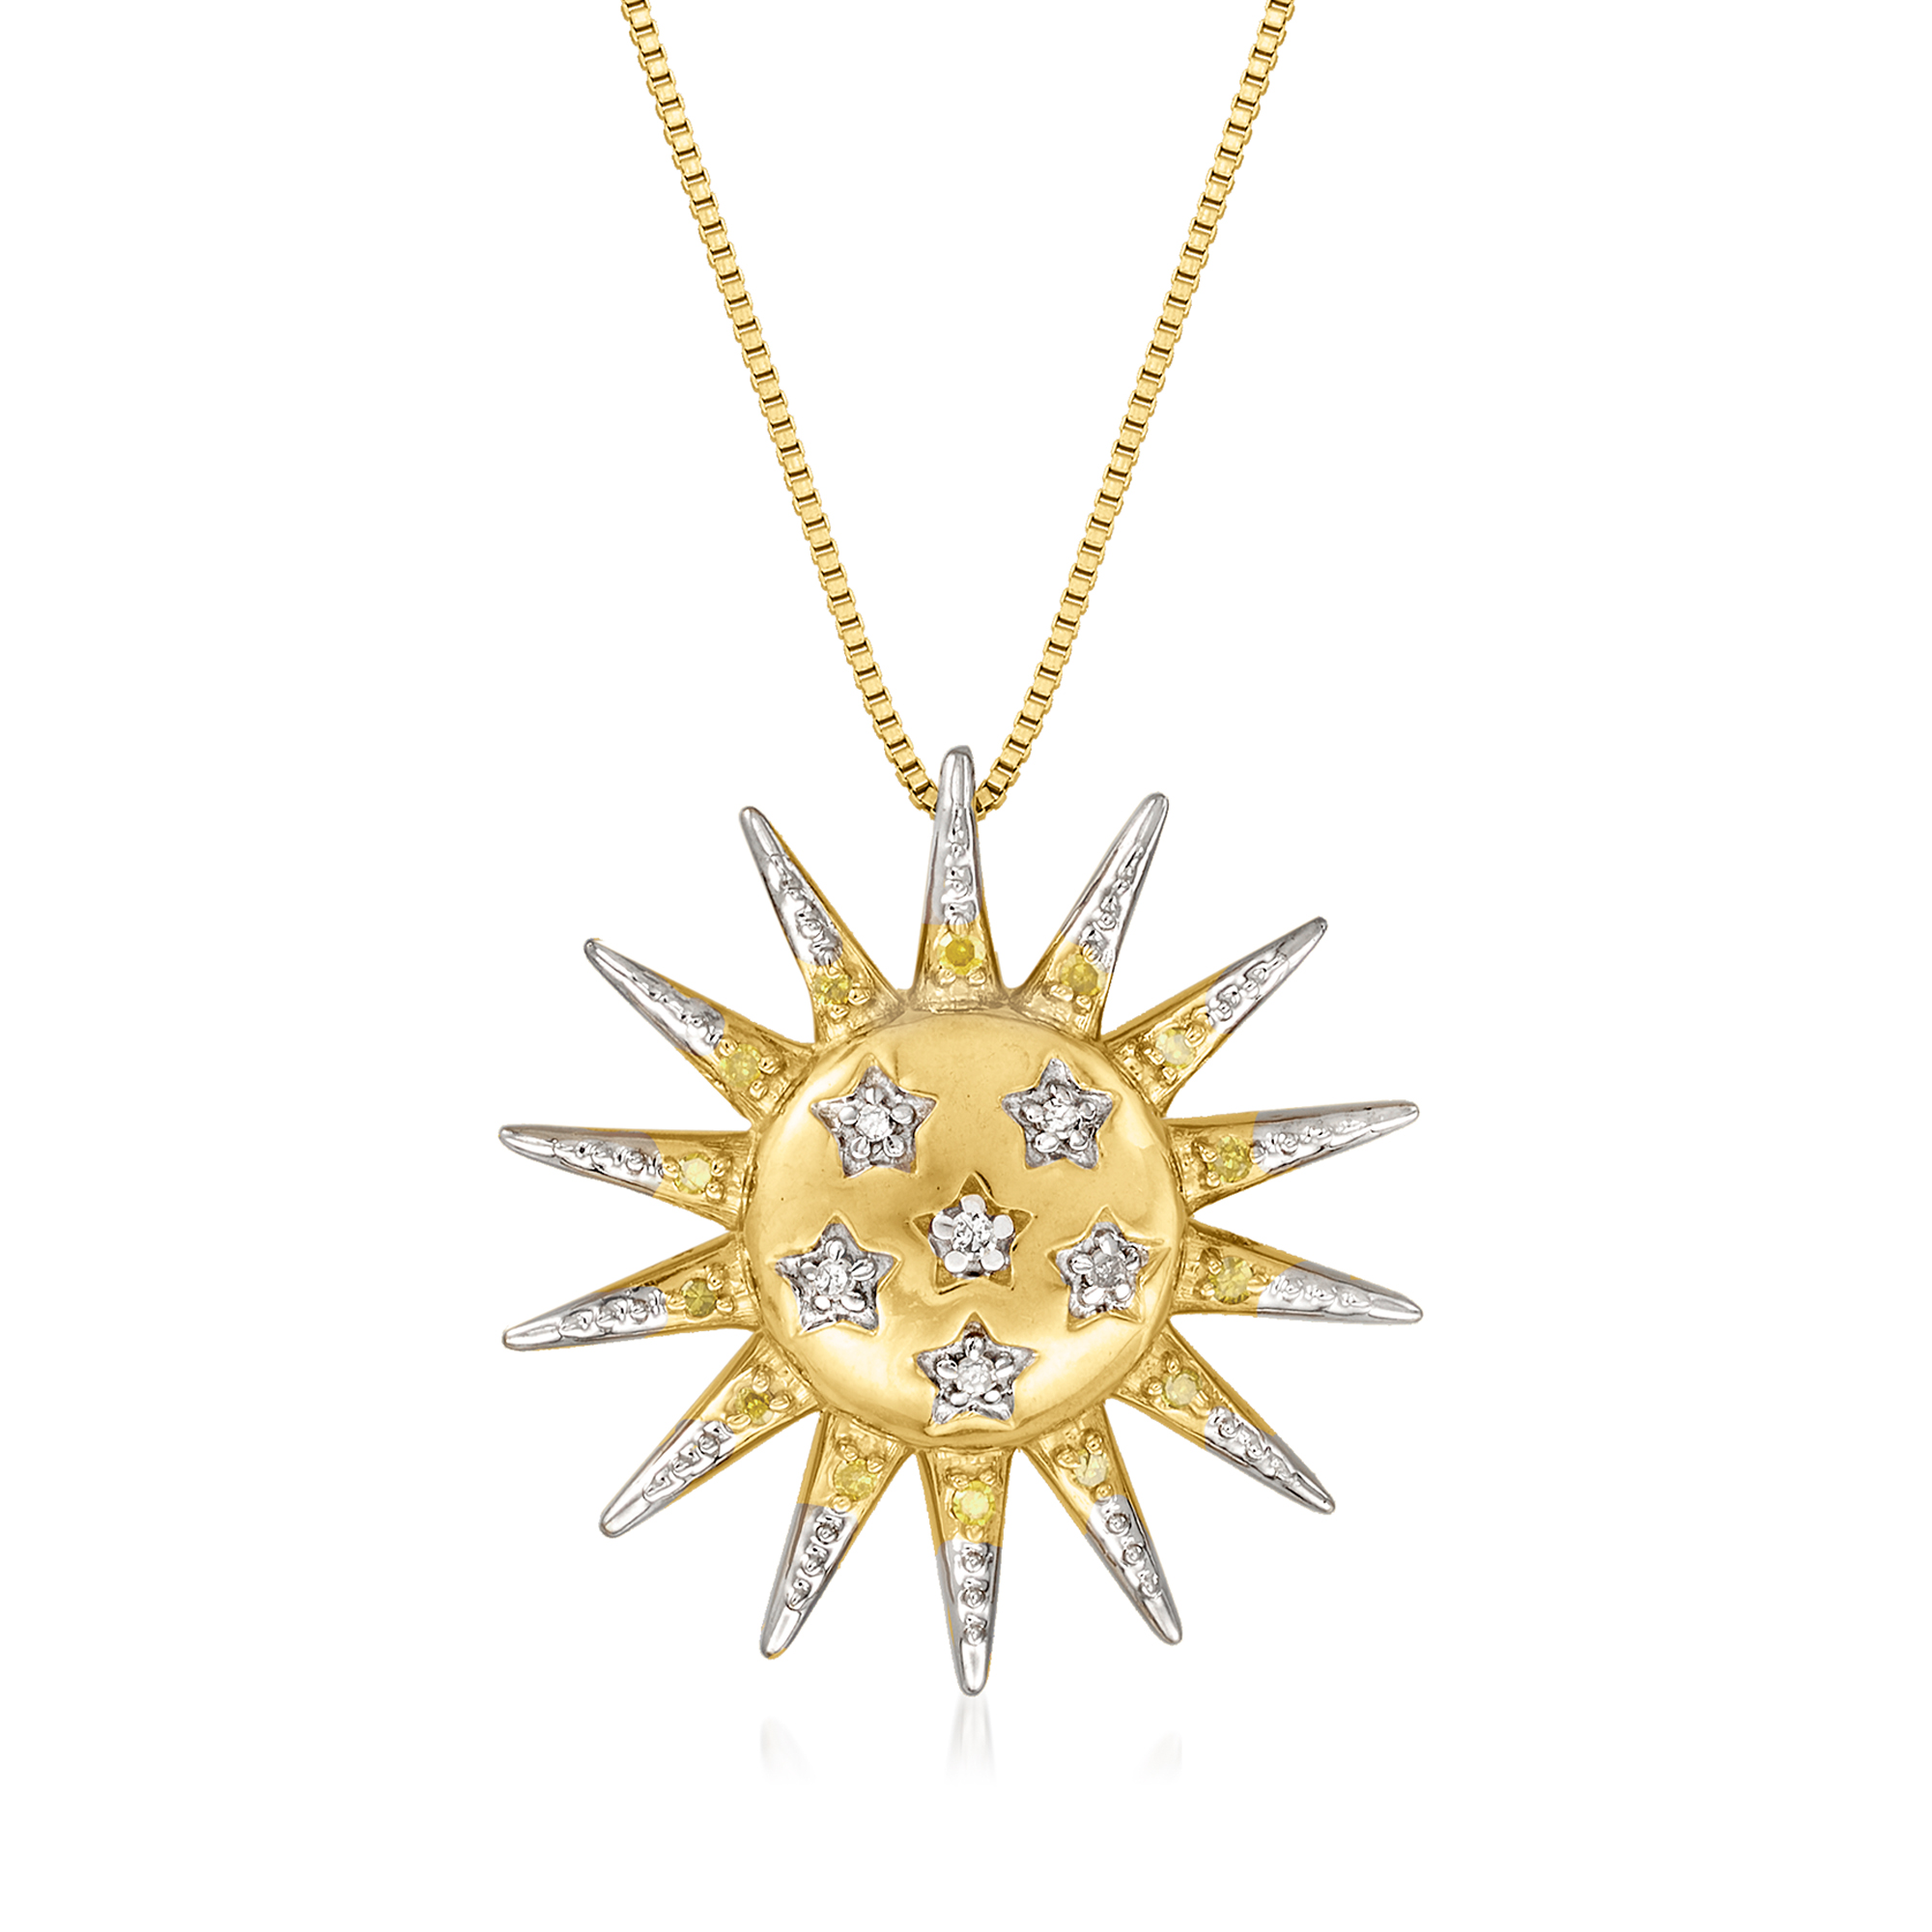 .10 ct. t.w. Diamond Sun Necklace in 18kt Gold Over Sterling. 18 